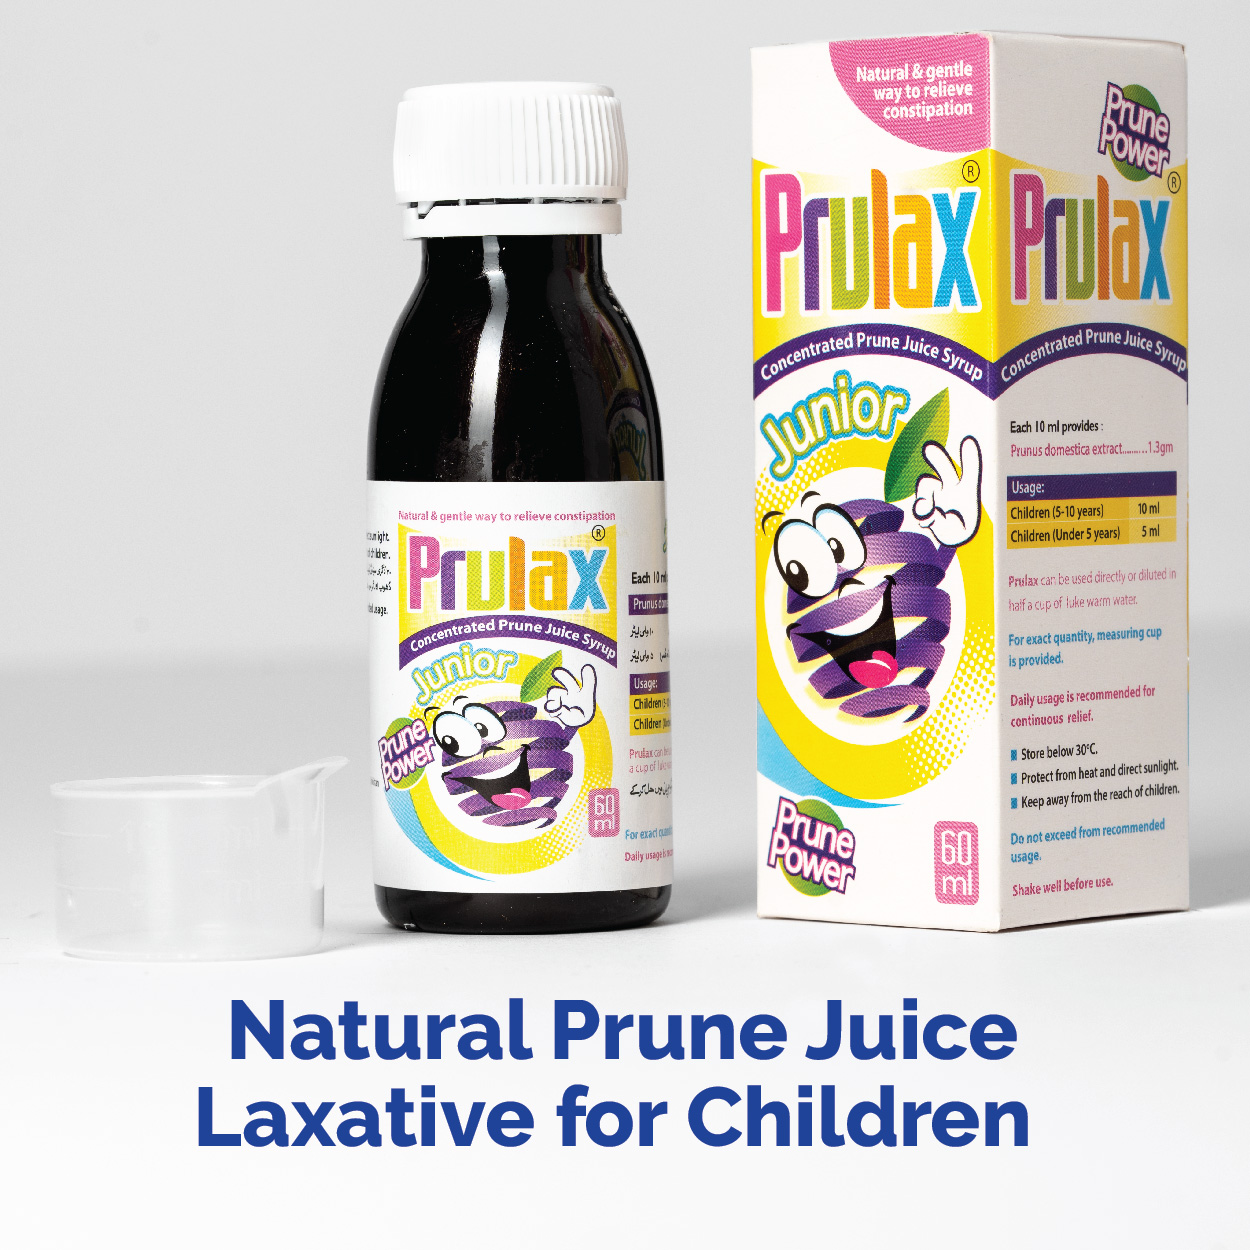 Natural Prune Juice Laxative for children